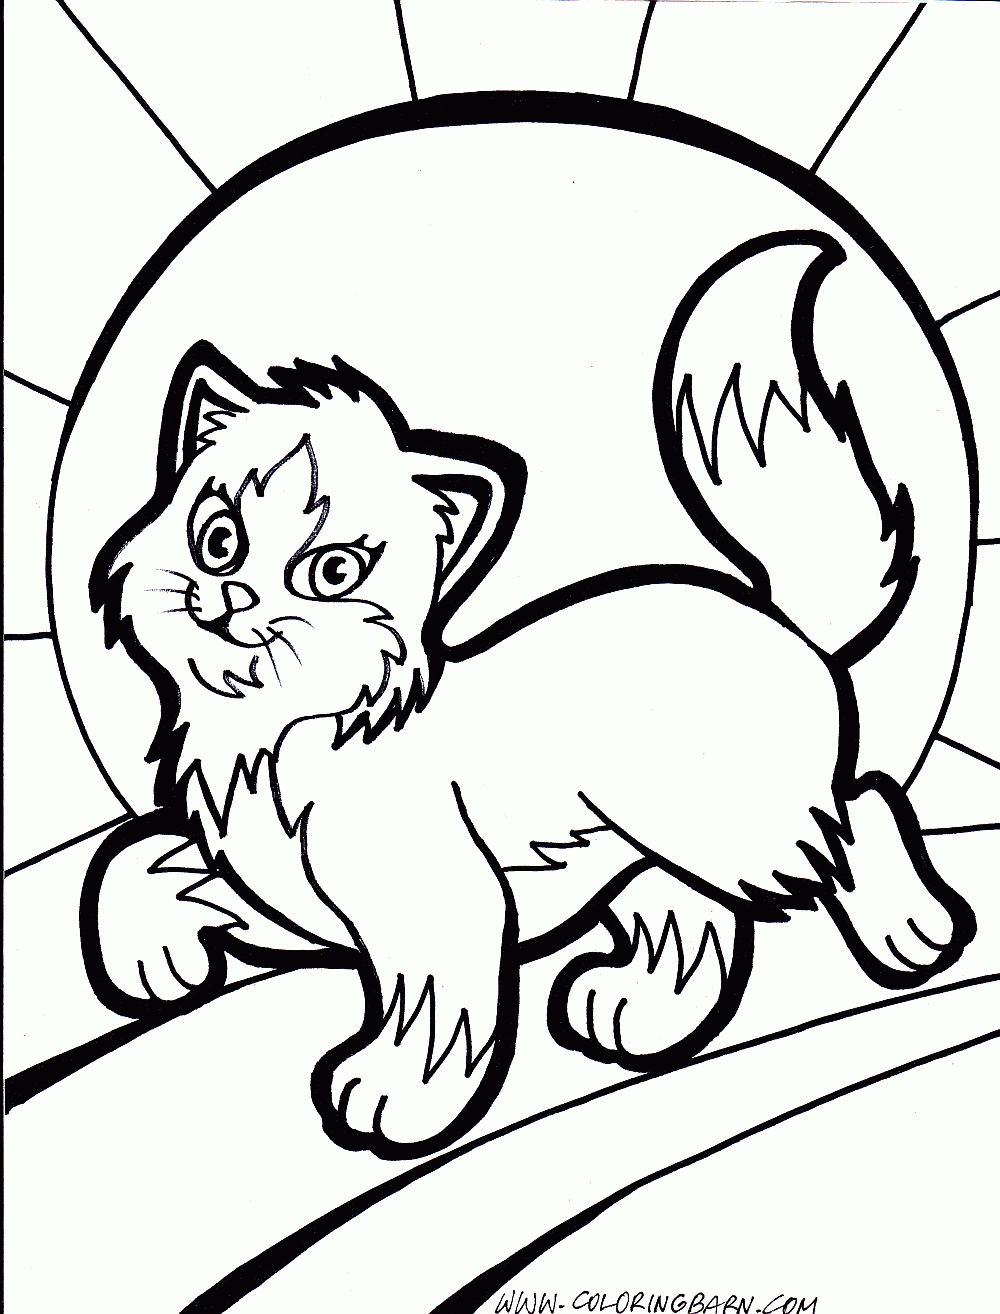  Coloring  Pages  for Kids Cat  Coloring  Pages  for Kids